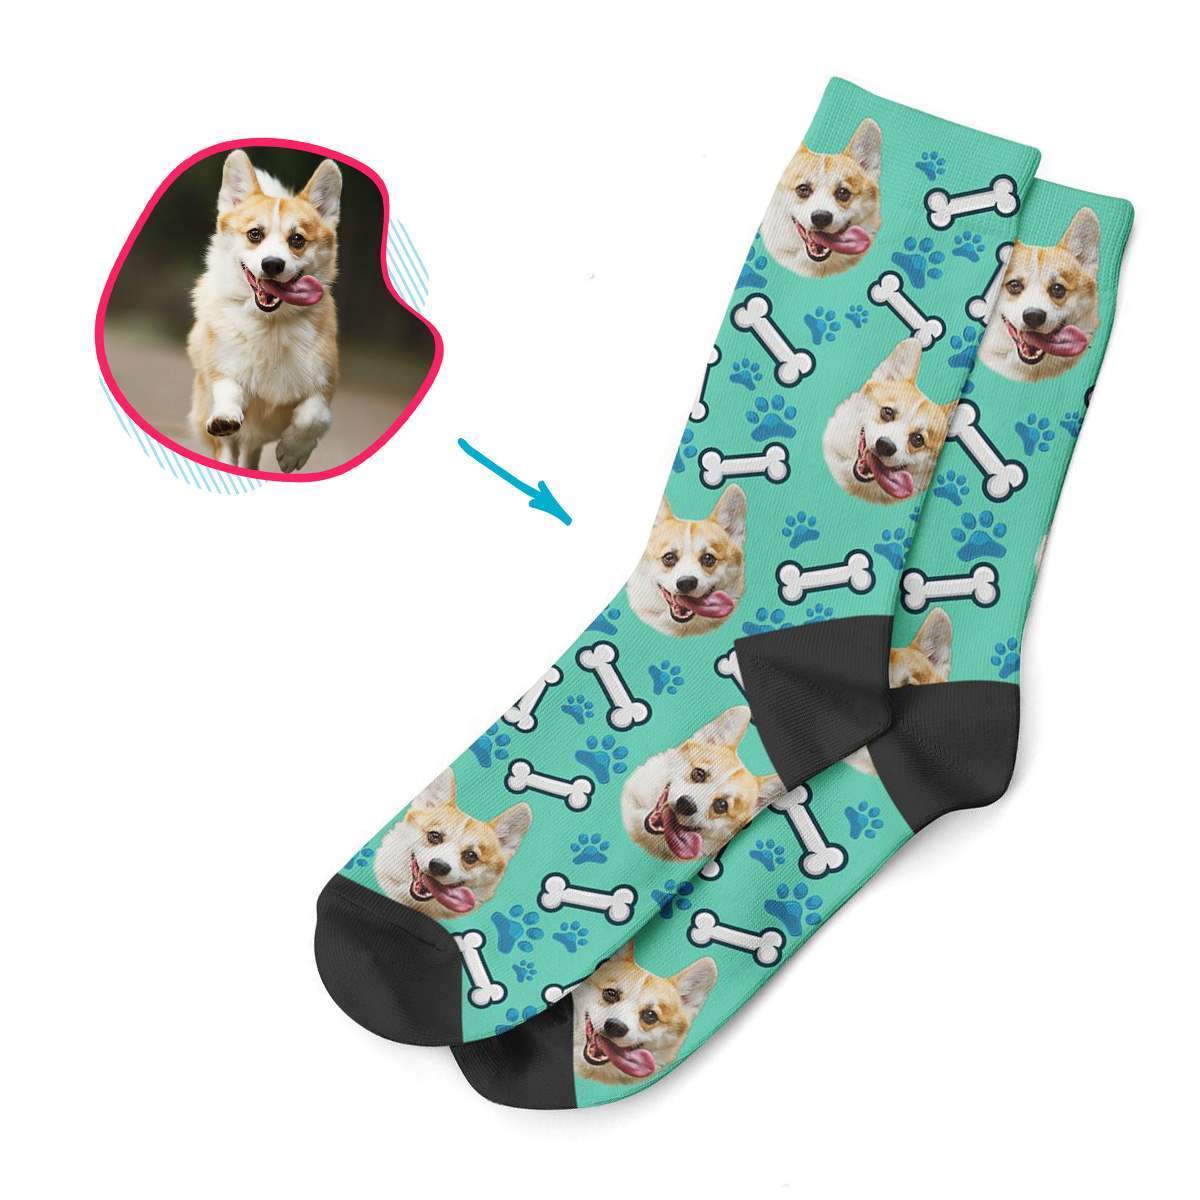 mint Dog socks personalized with photo of face printed on them